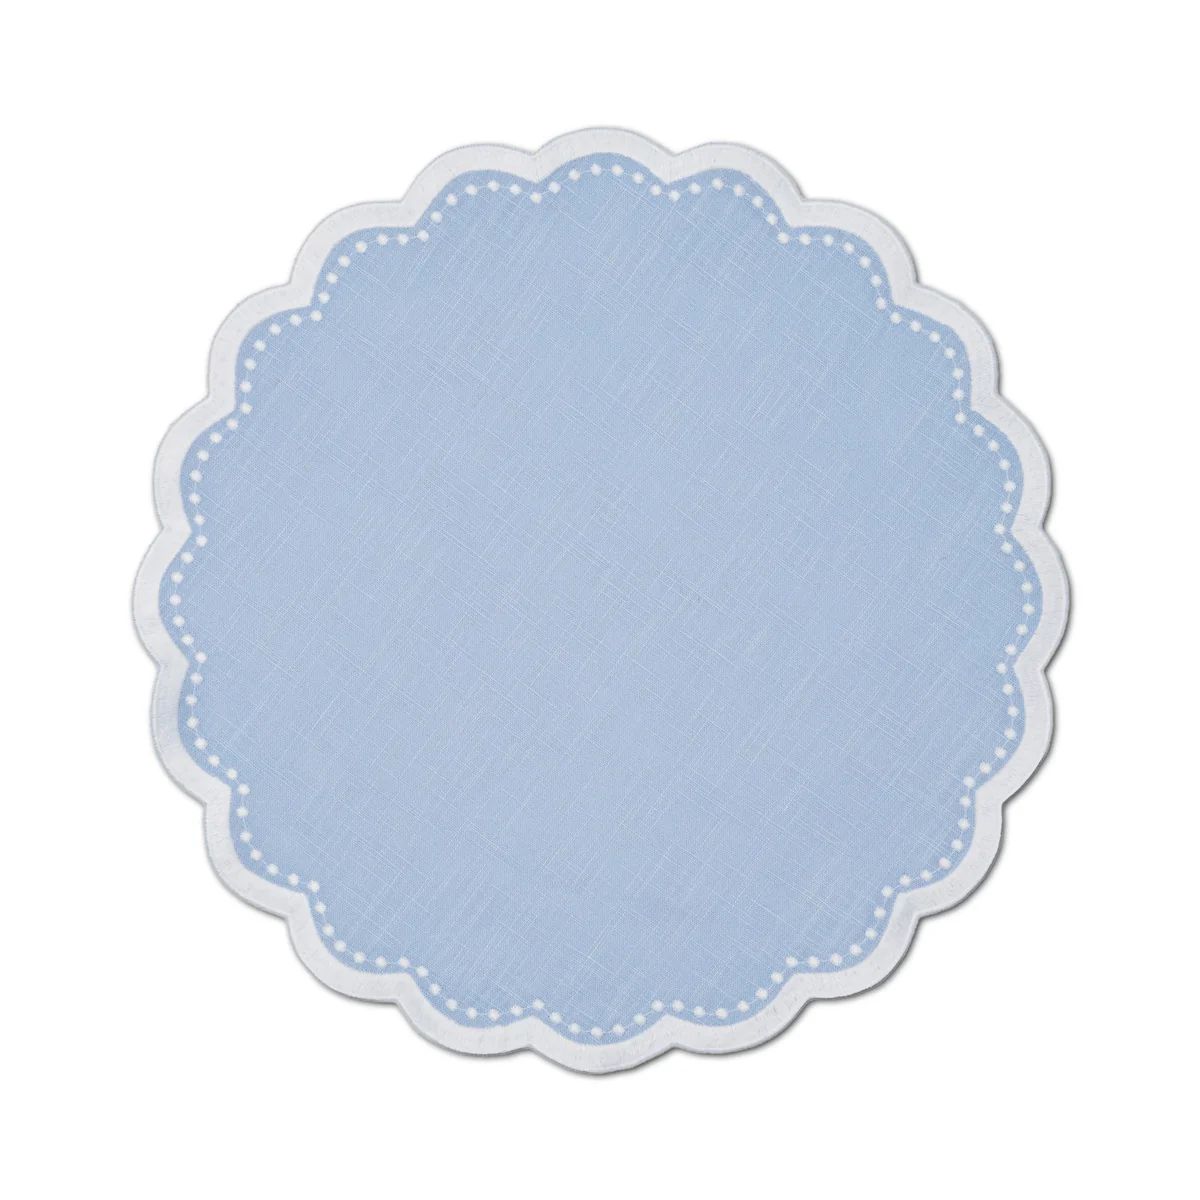 Bluebell Placemat in Light Blue, Set of 4 | Over The Moon